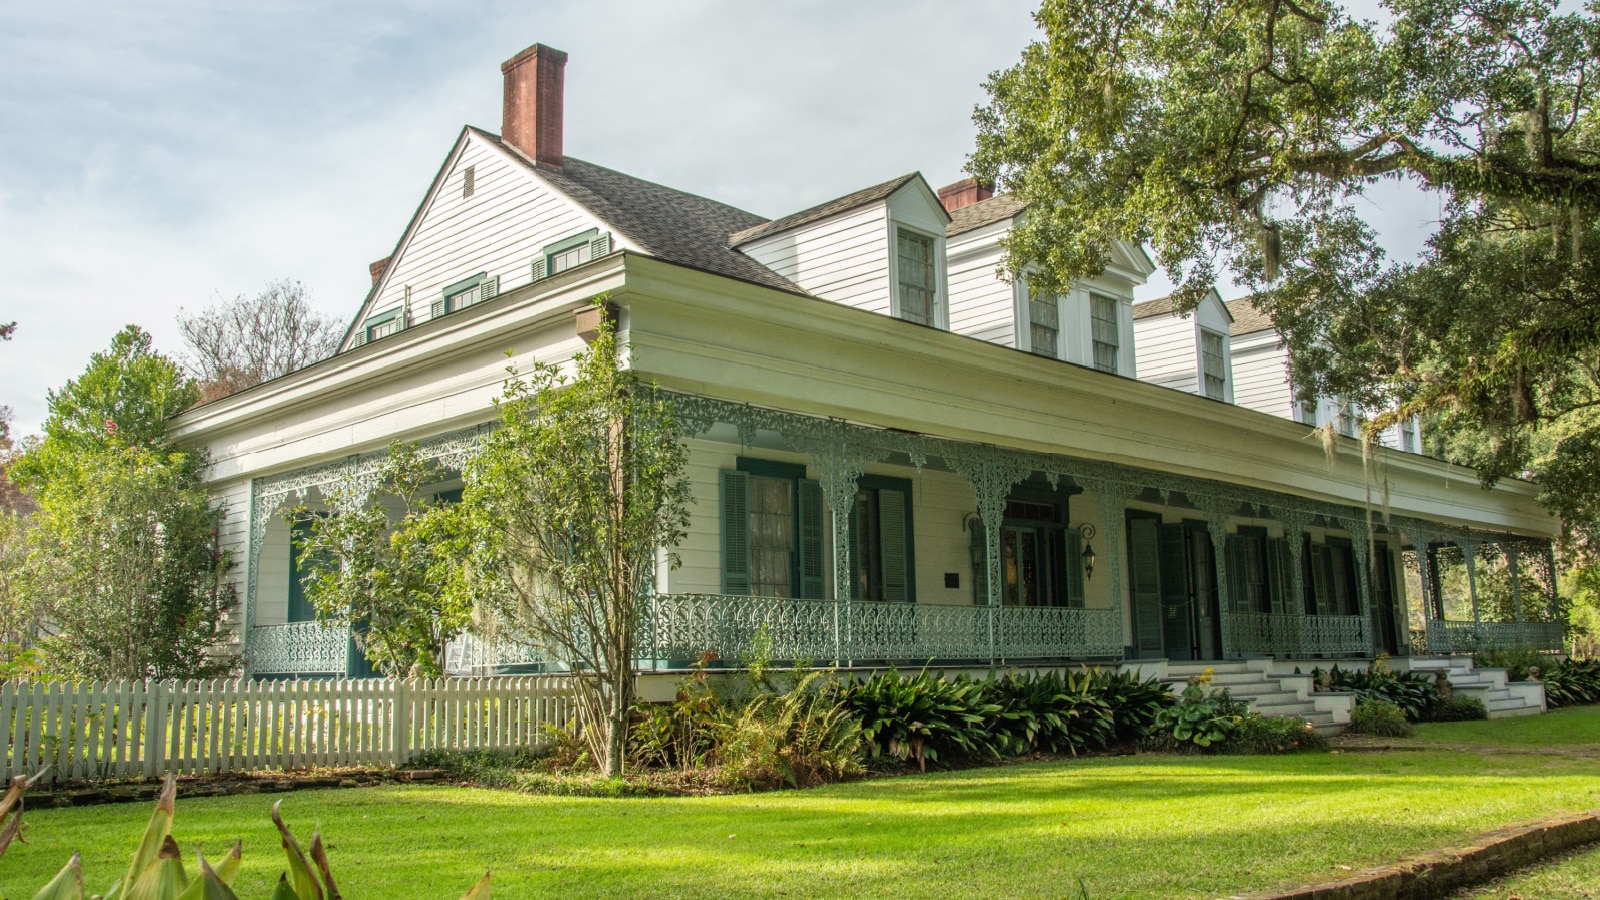 St. Francisville, USA – December 2, 2022 - Creole cottage style historic home and former antebellum Myrtles Plantation built in 1796 in St. Francisville, West Feliciana Parish, Louisiana